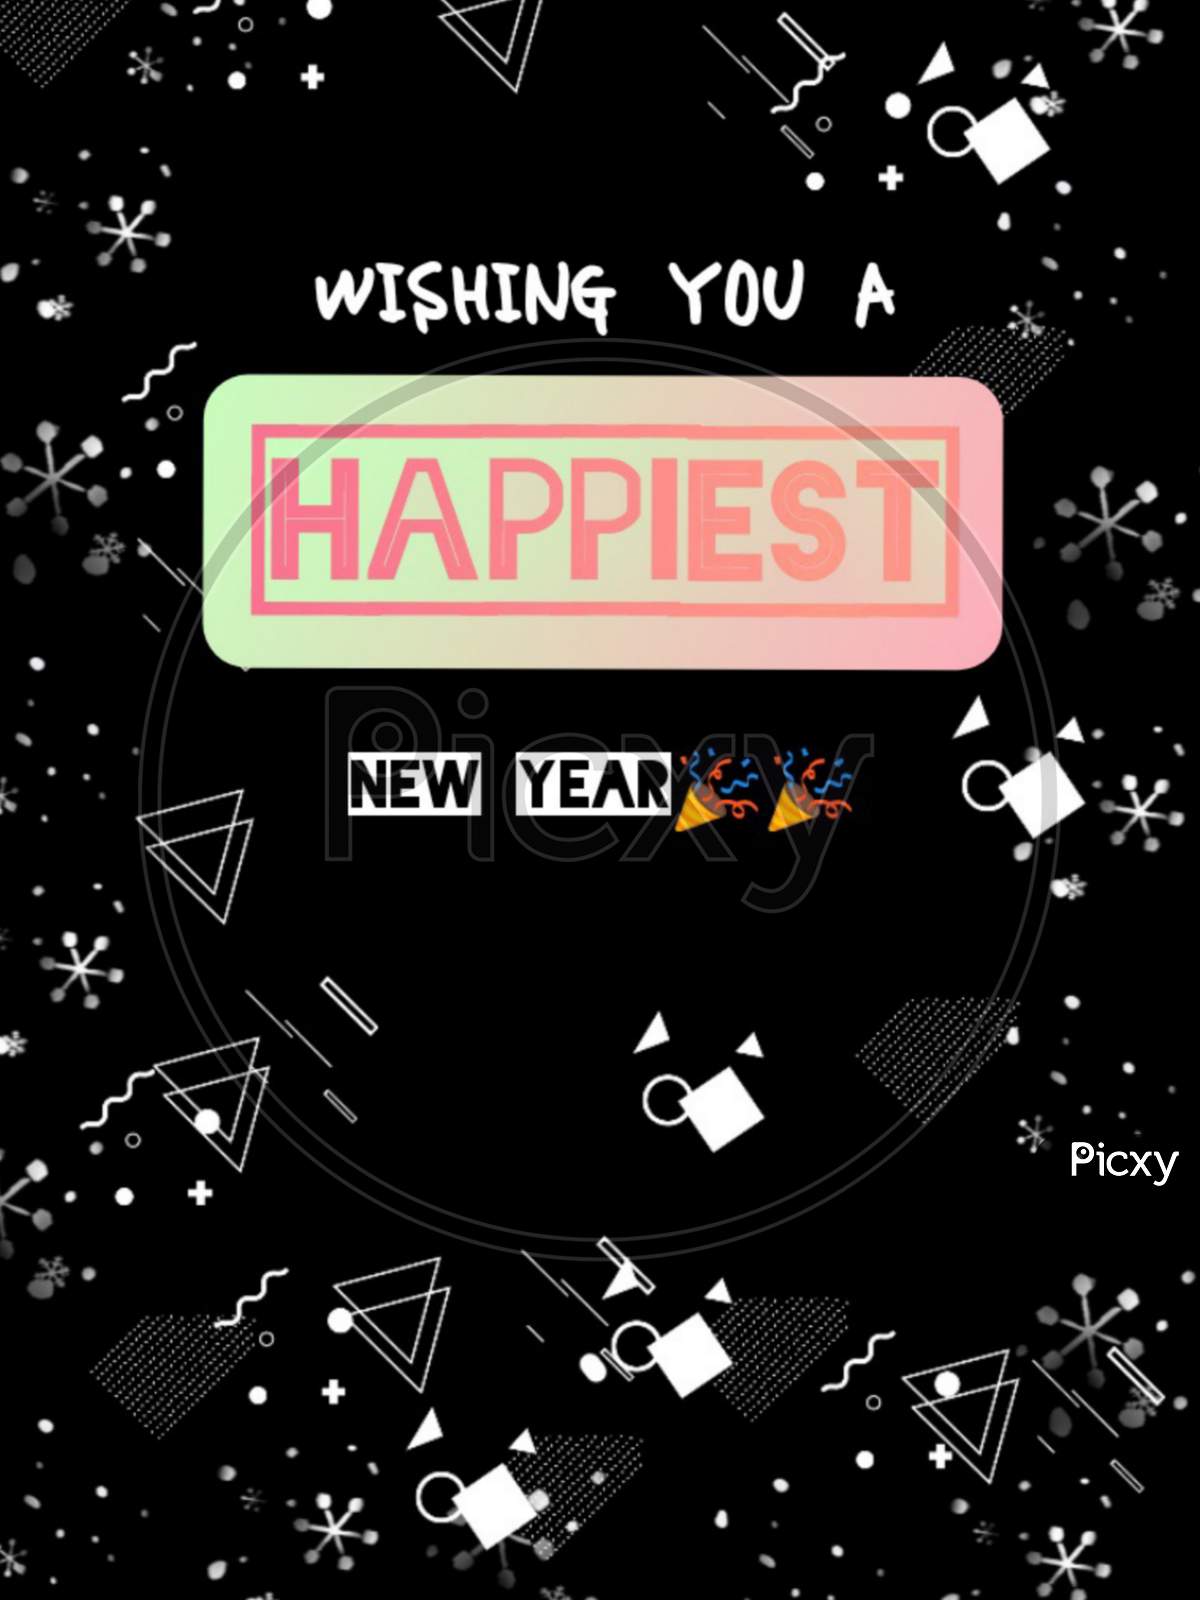 New year 2020 wishes